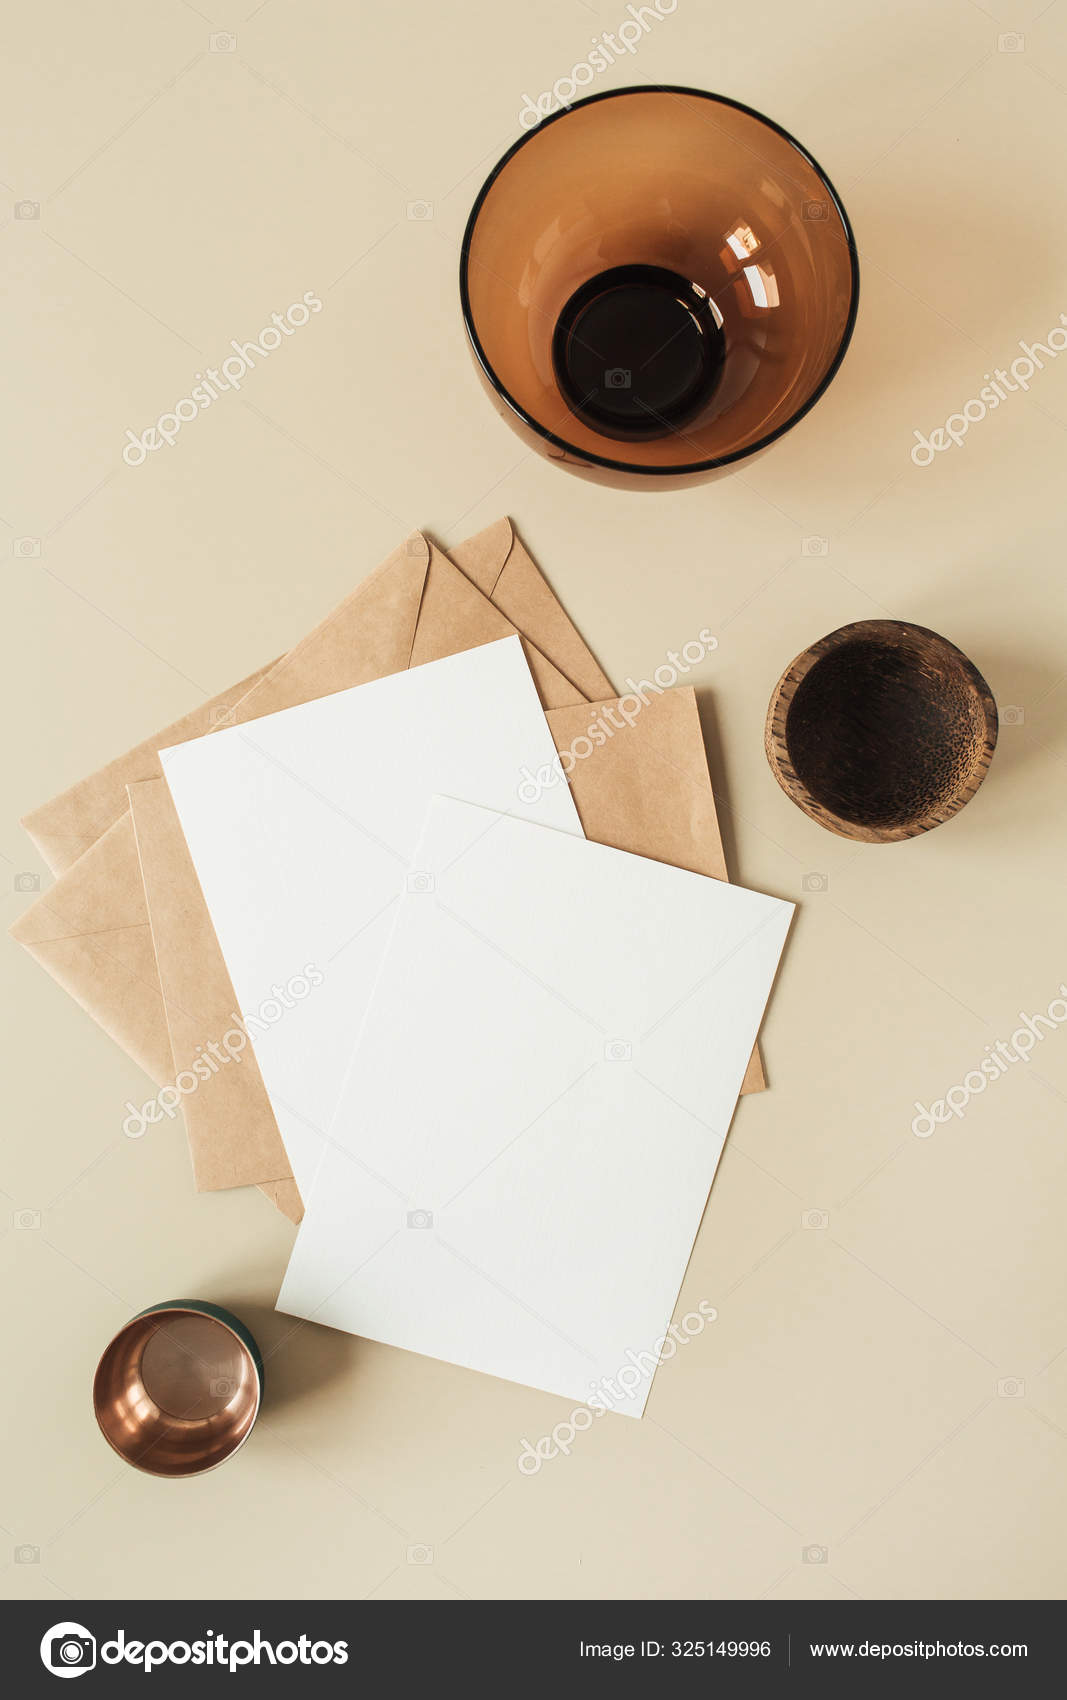 Hydrangea Letter Papers